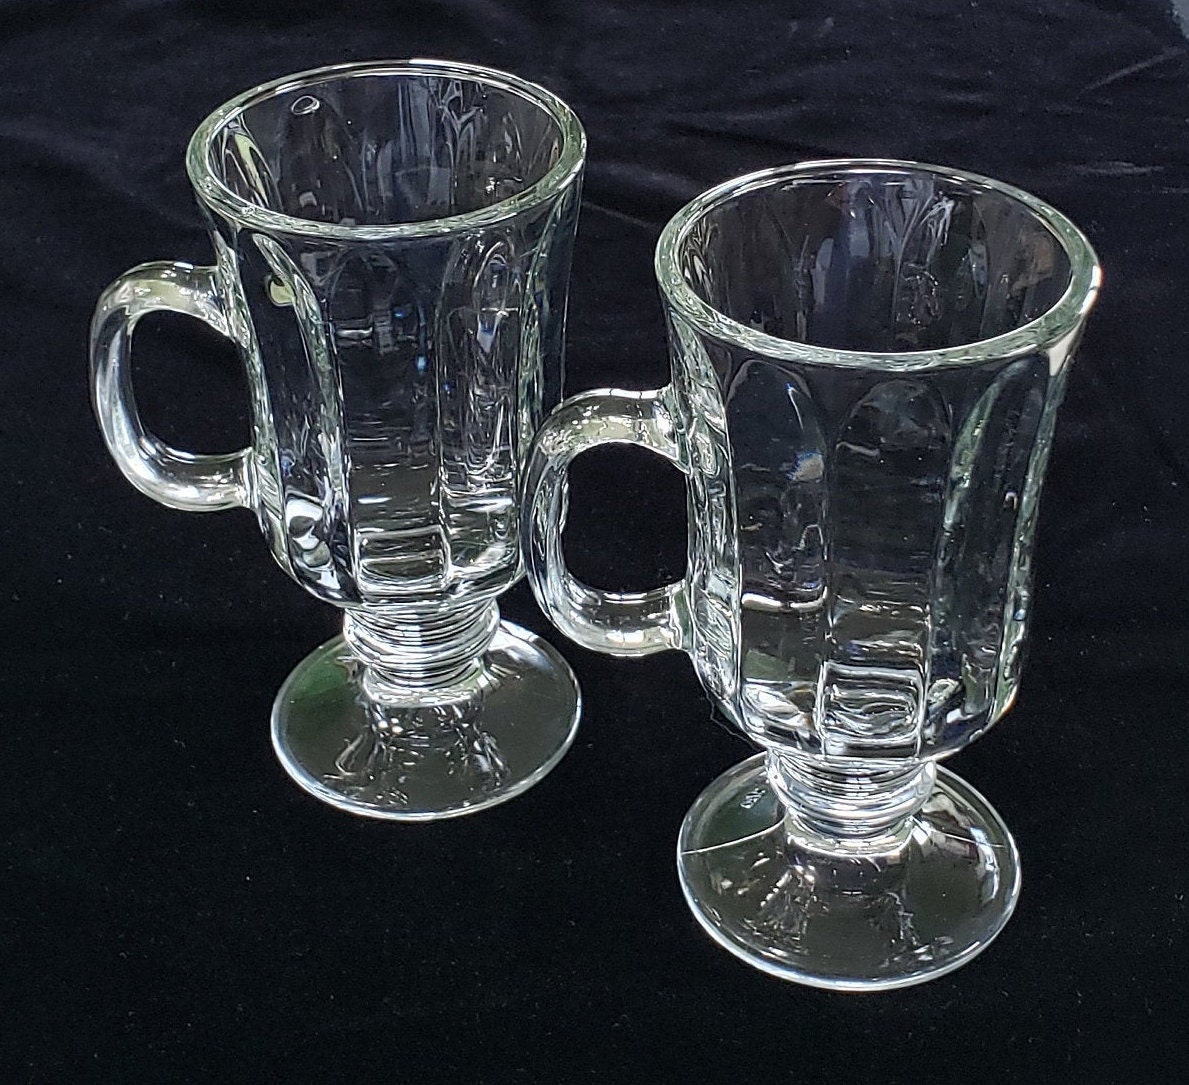 Crystalia Set of 2 Irish Coffee Mugs with Handle, Tall Funnel Clear Glasses  for Iced Coffee, Latte, Cappuccino, Hot Chocolate 